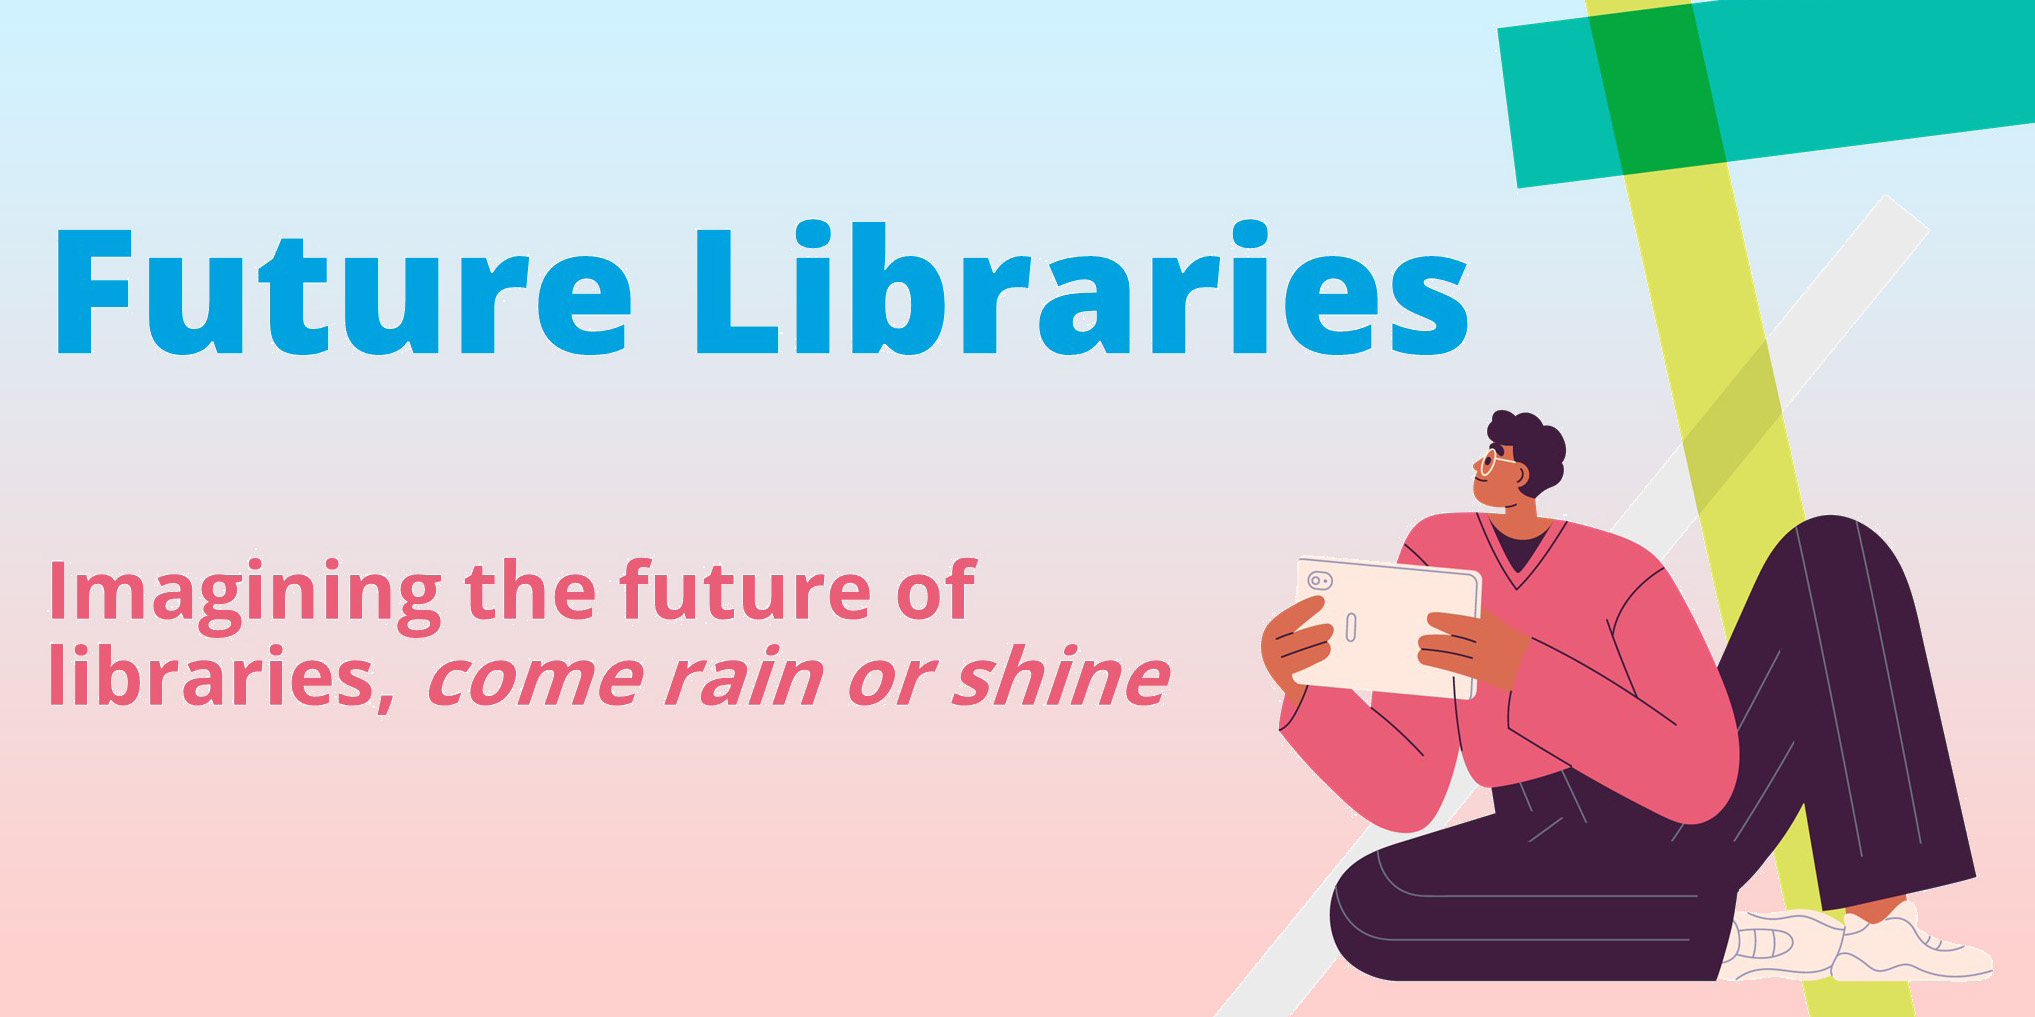 Future Libraries: Imagining the future of libraries come rain or shine. With a graphic of a person under a signpost using a smartphone.